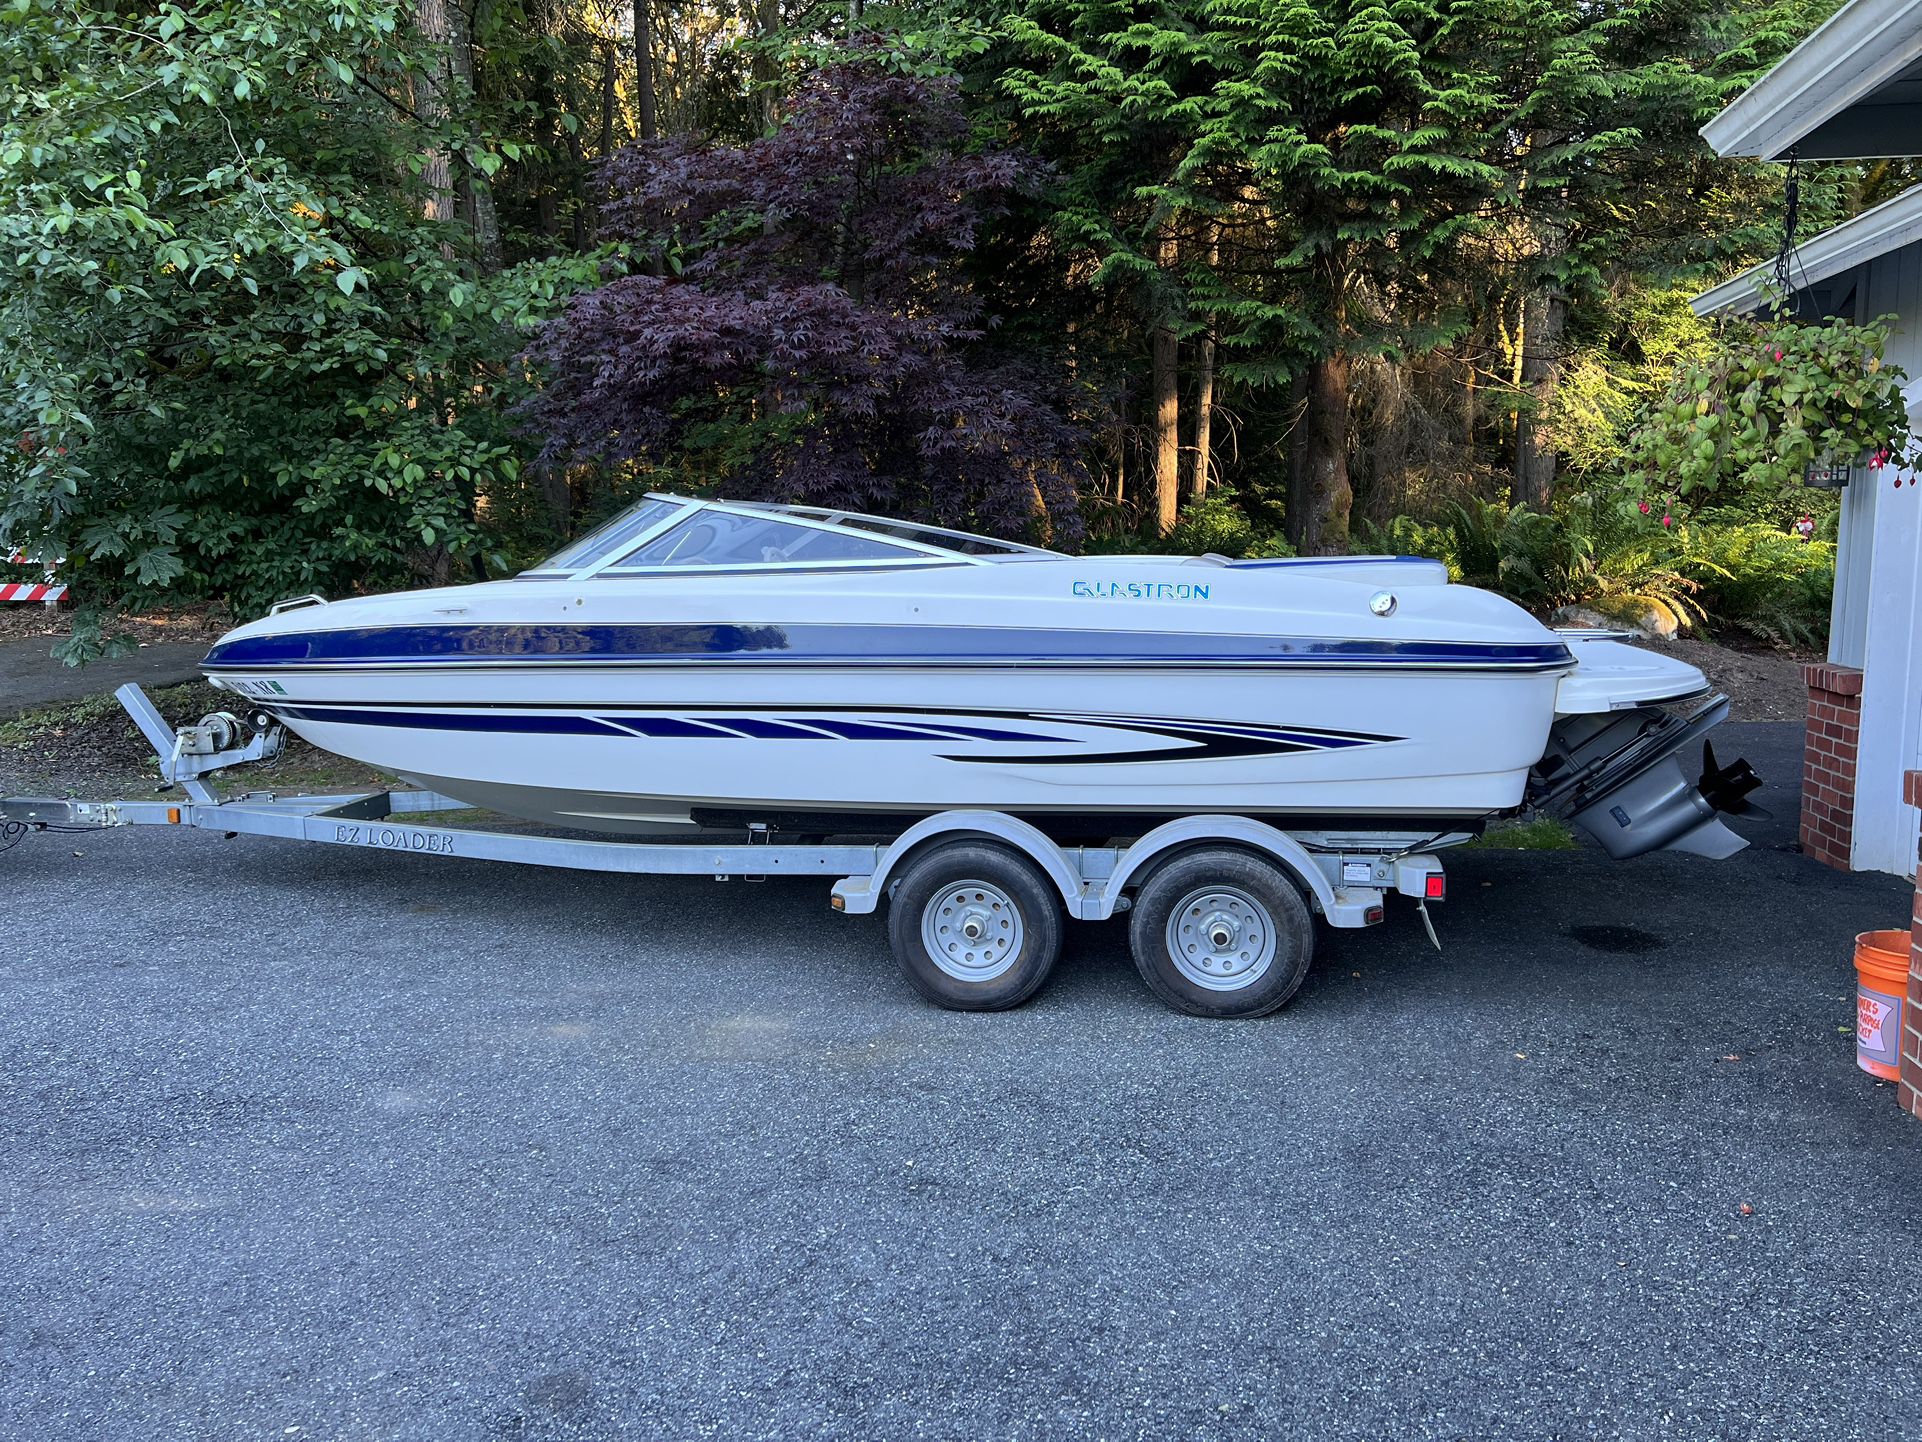 2007 Glaston GT205 21 Ft 21 Foot Ski And Or Wake  Boat In Great Shape  Low Hours 